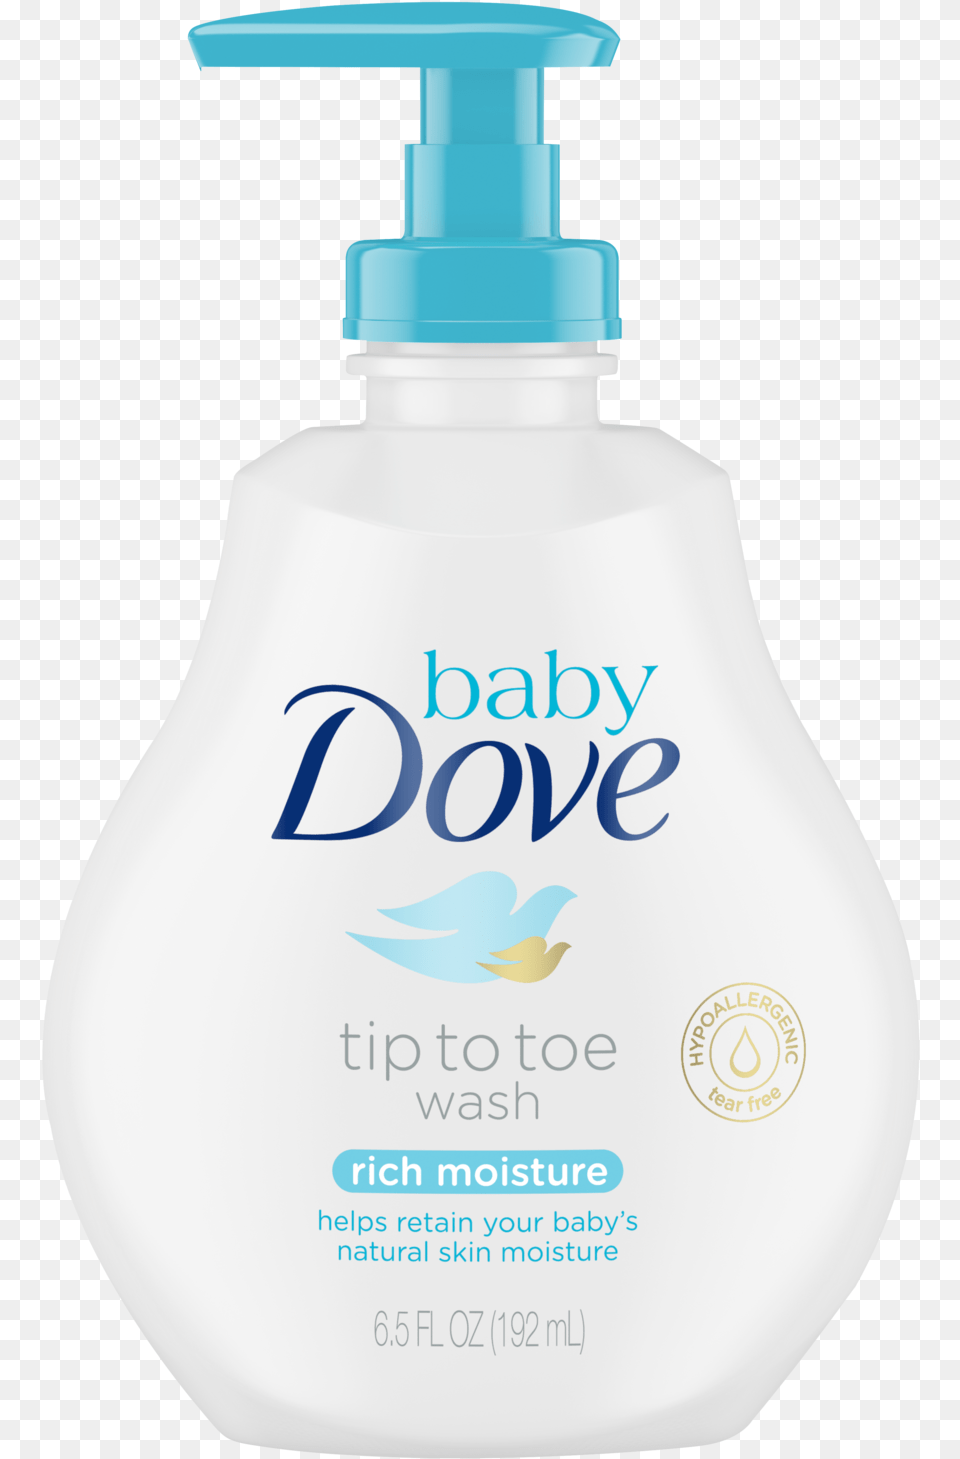 Baby Dove Rich Moisture Tip To Toe Wash 13 Oz Dove, Bottle, Lotion, Cosmetics, Shaker Free Transparent Png